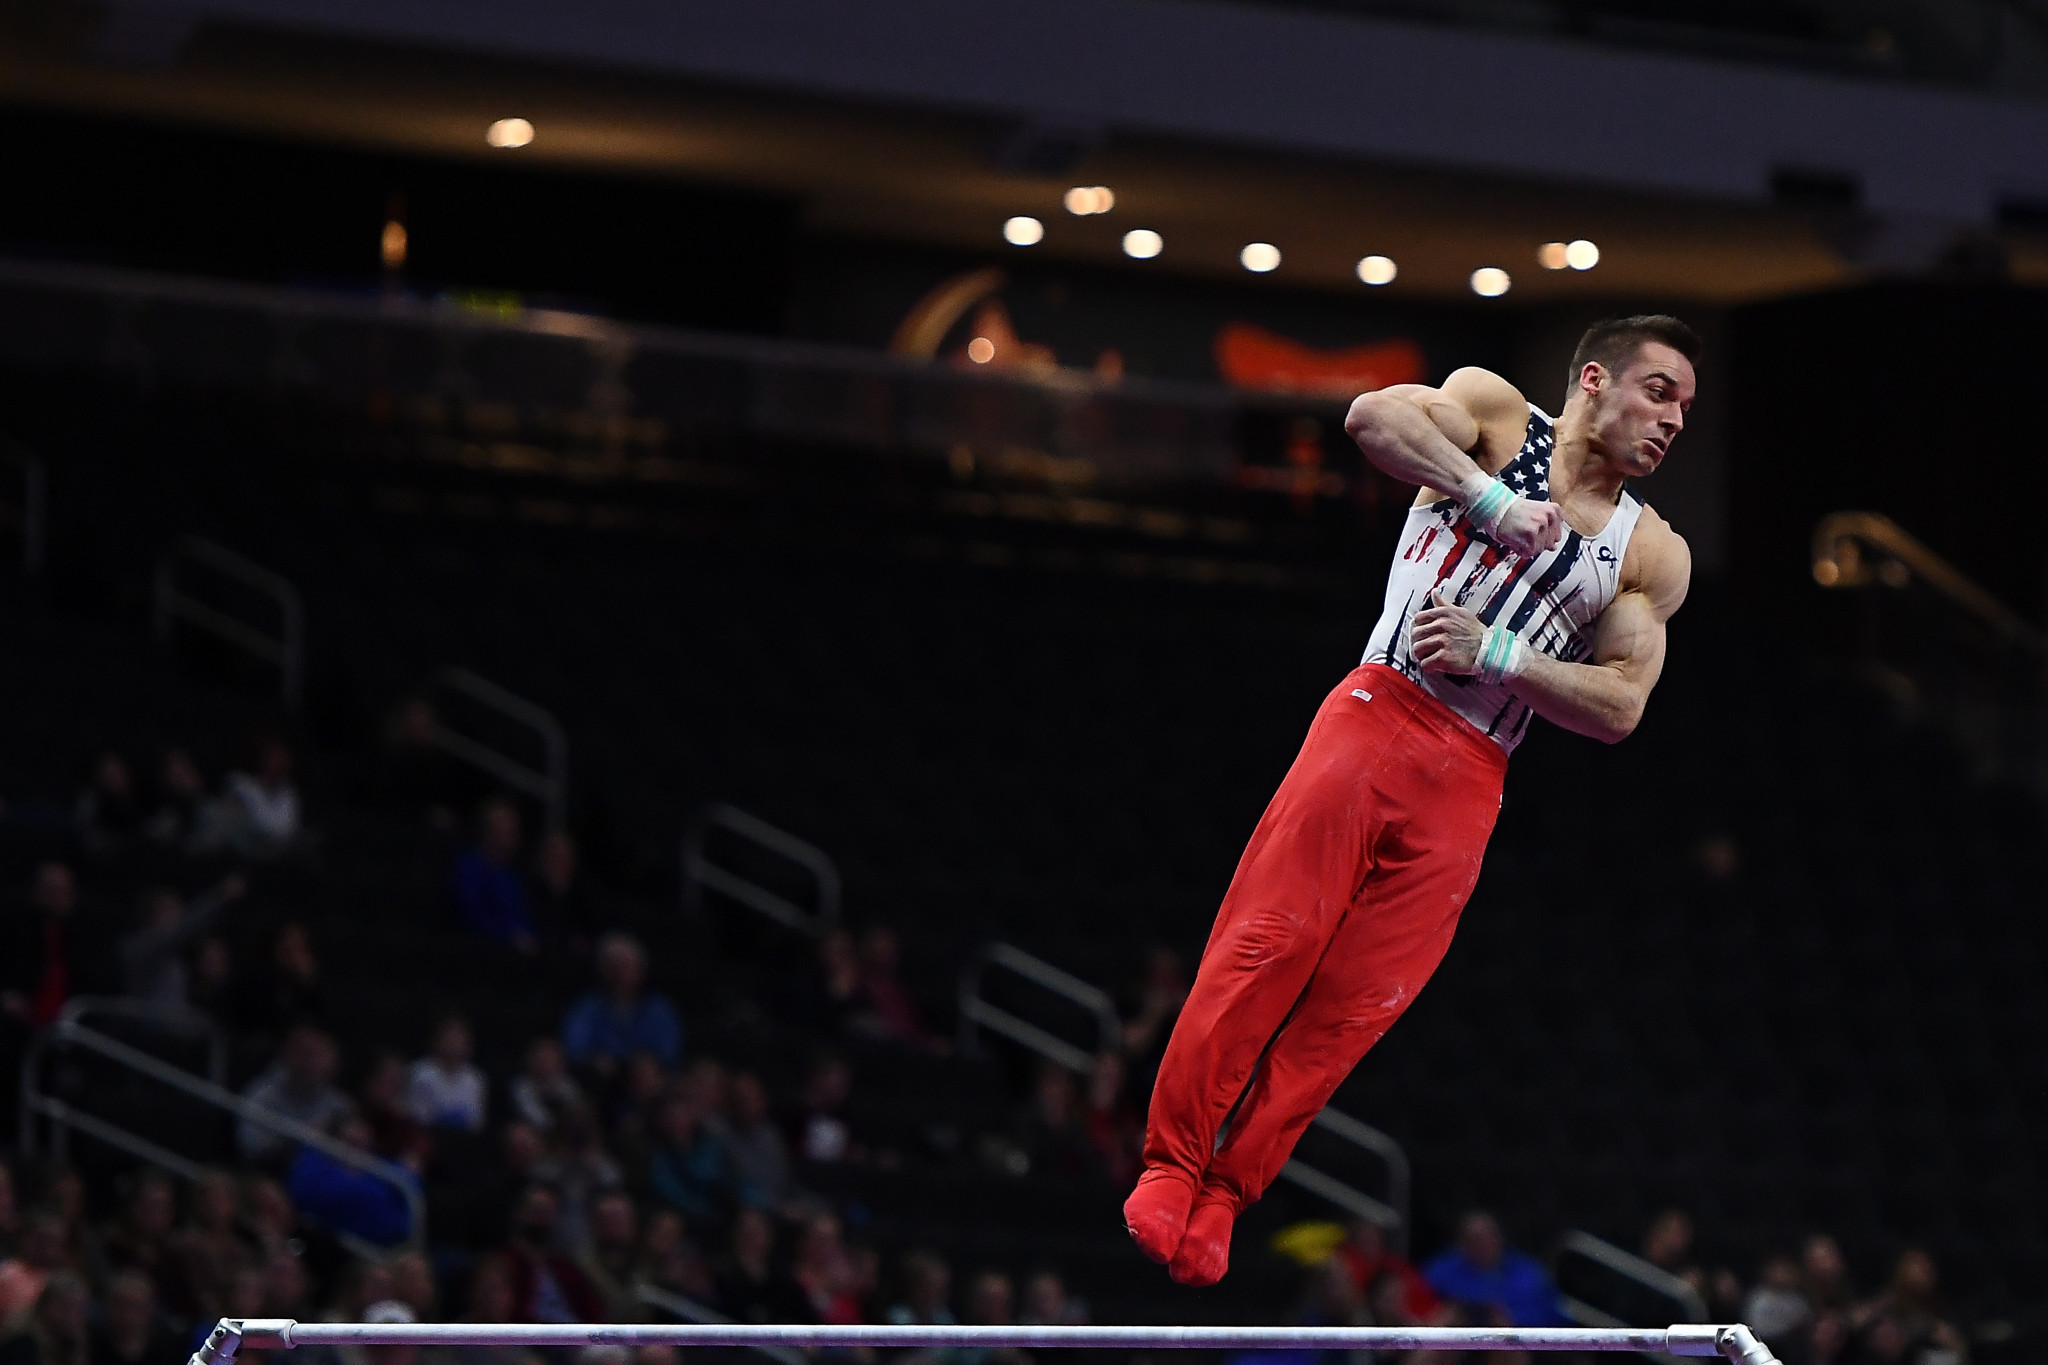 America's top male gymnast Sam Mikulak announced he will retire after next year's Olympic Games in Tokyo ©Getty Images